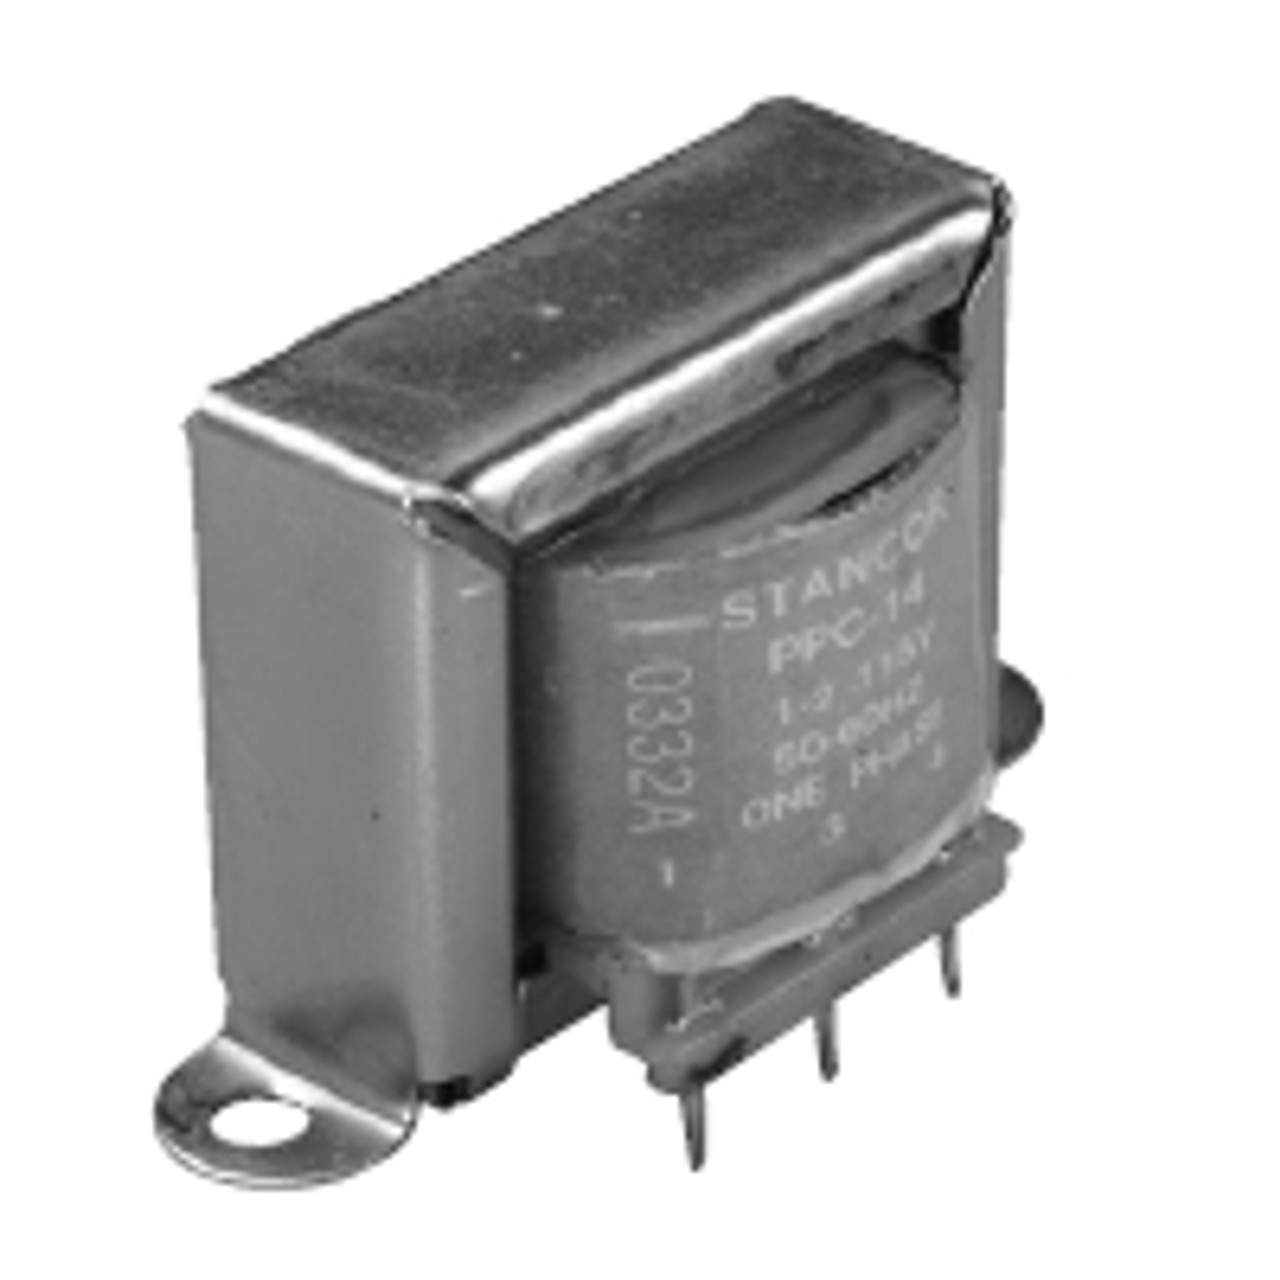 Stancor / White Rodgers PPC-19 Printed Circuit Transformers